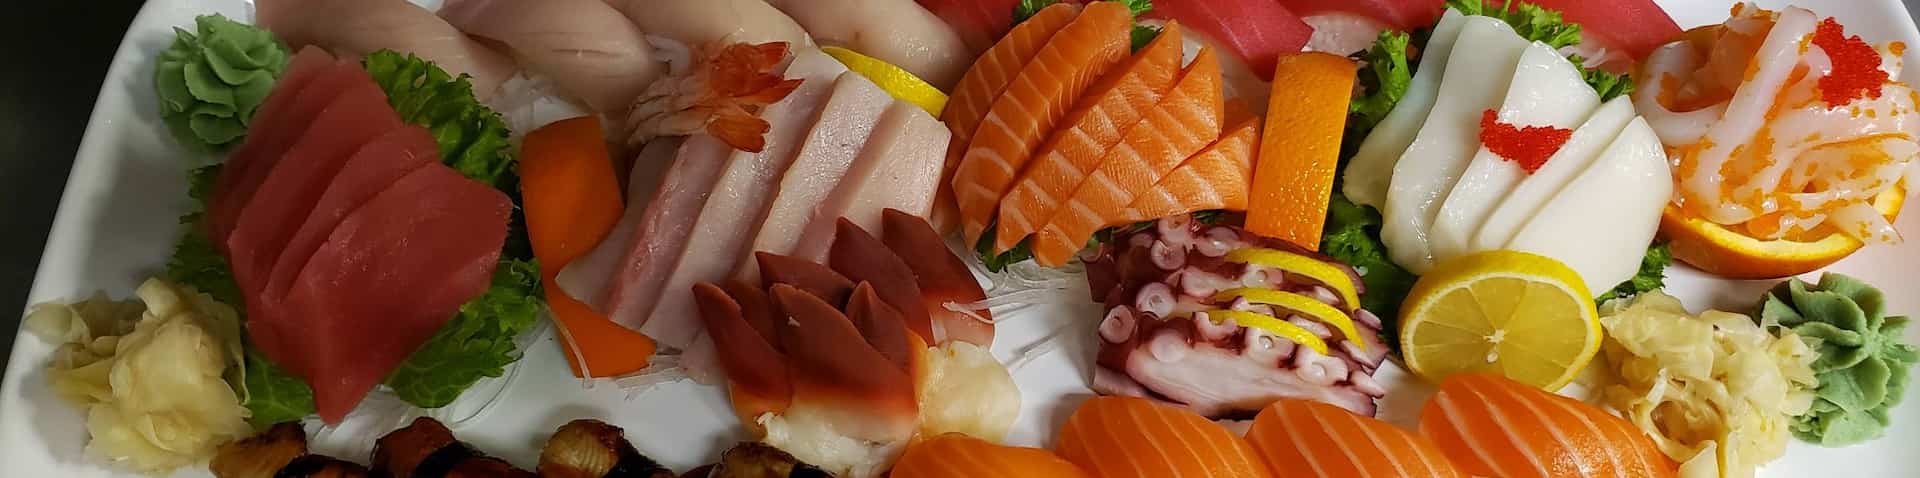 plate of assortment of sushi